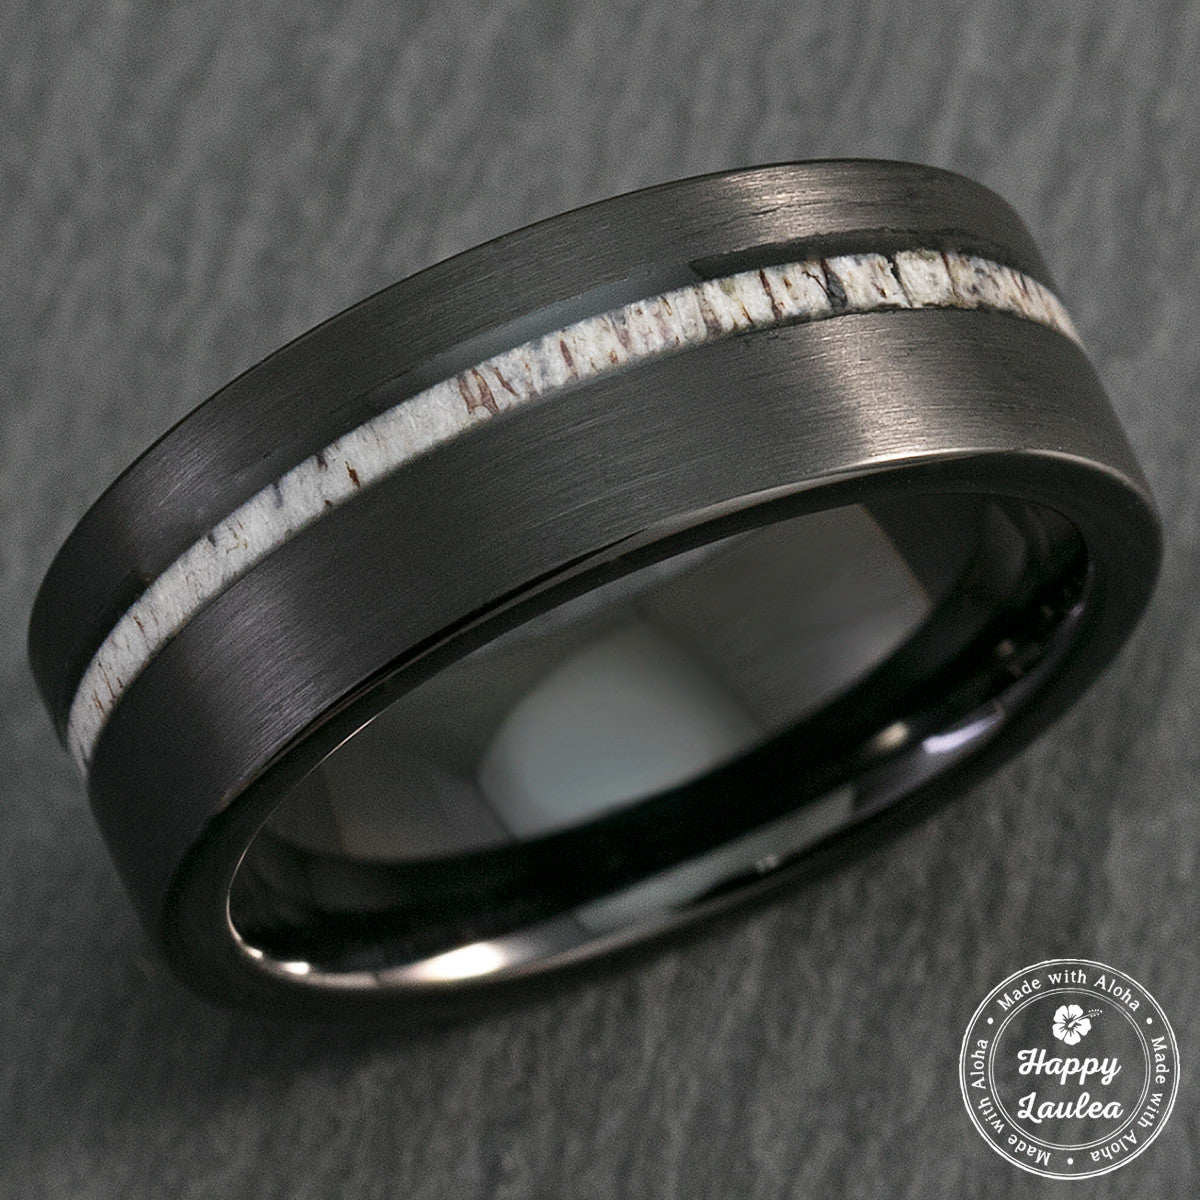 Black Tungsten Carbide Brush Finish Ring with Offset Antler Inlay - 8mm, Flat Shape, Comfort Fitment